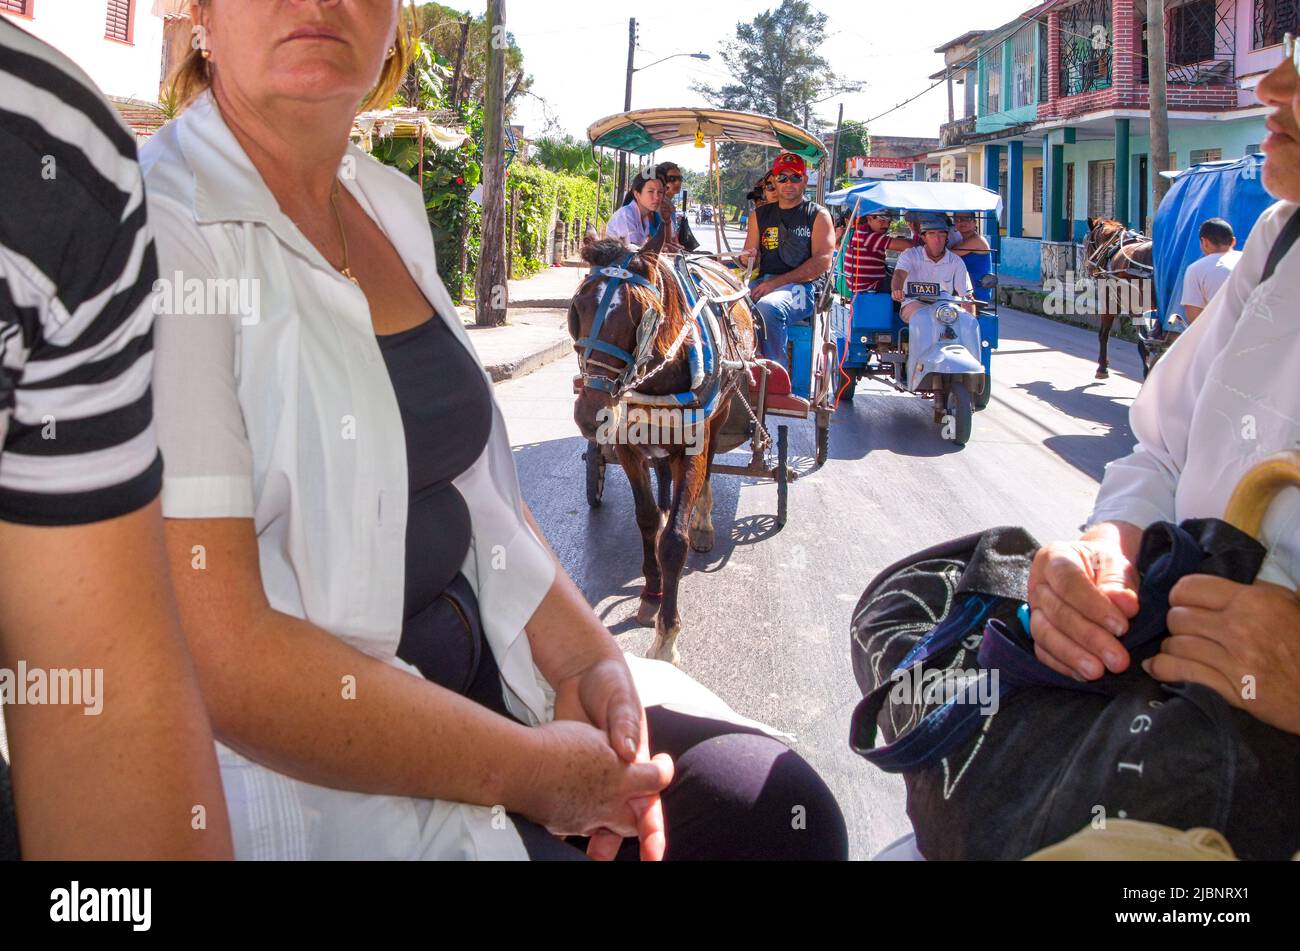 Healthcare personnel commuting in a horse cart in the city center. Stock Photo